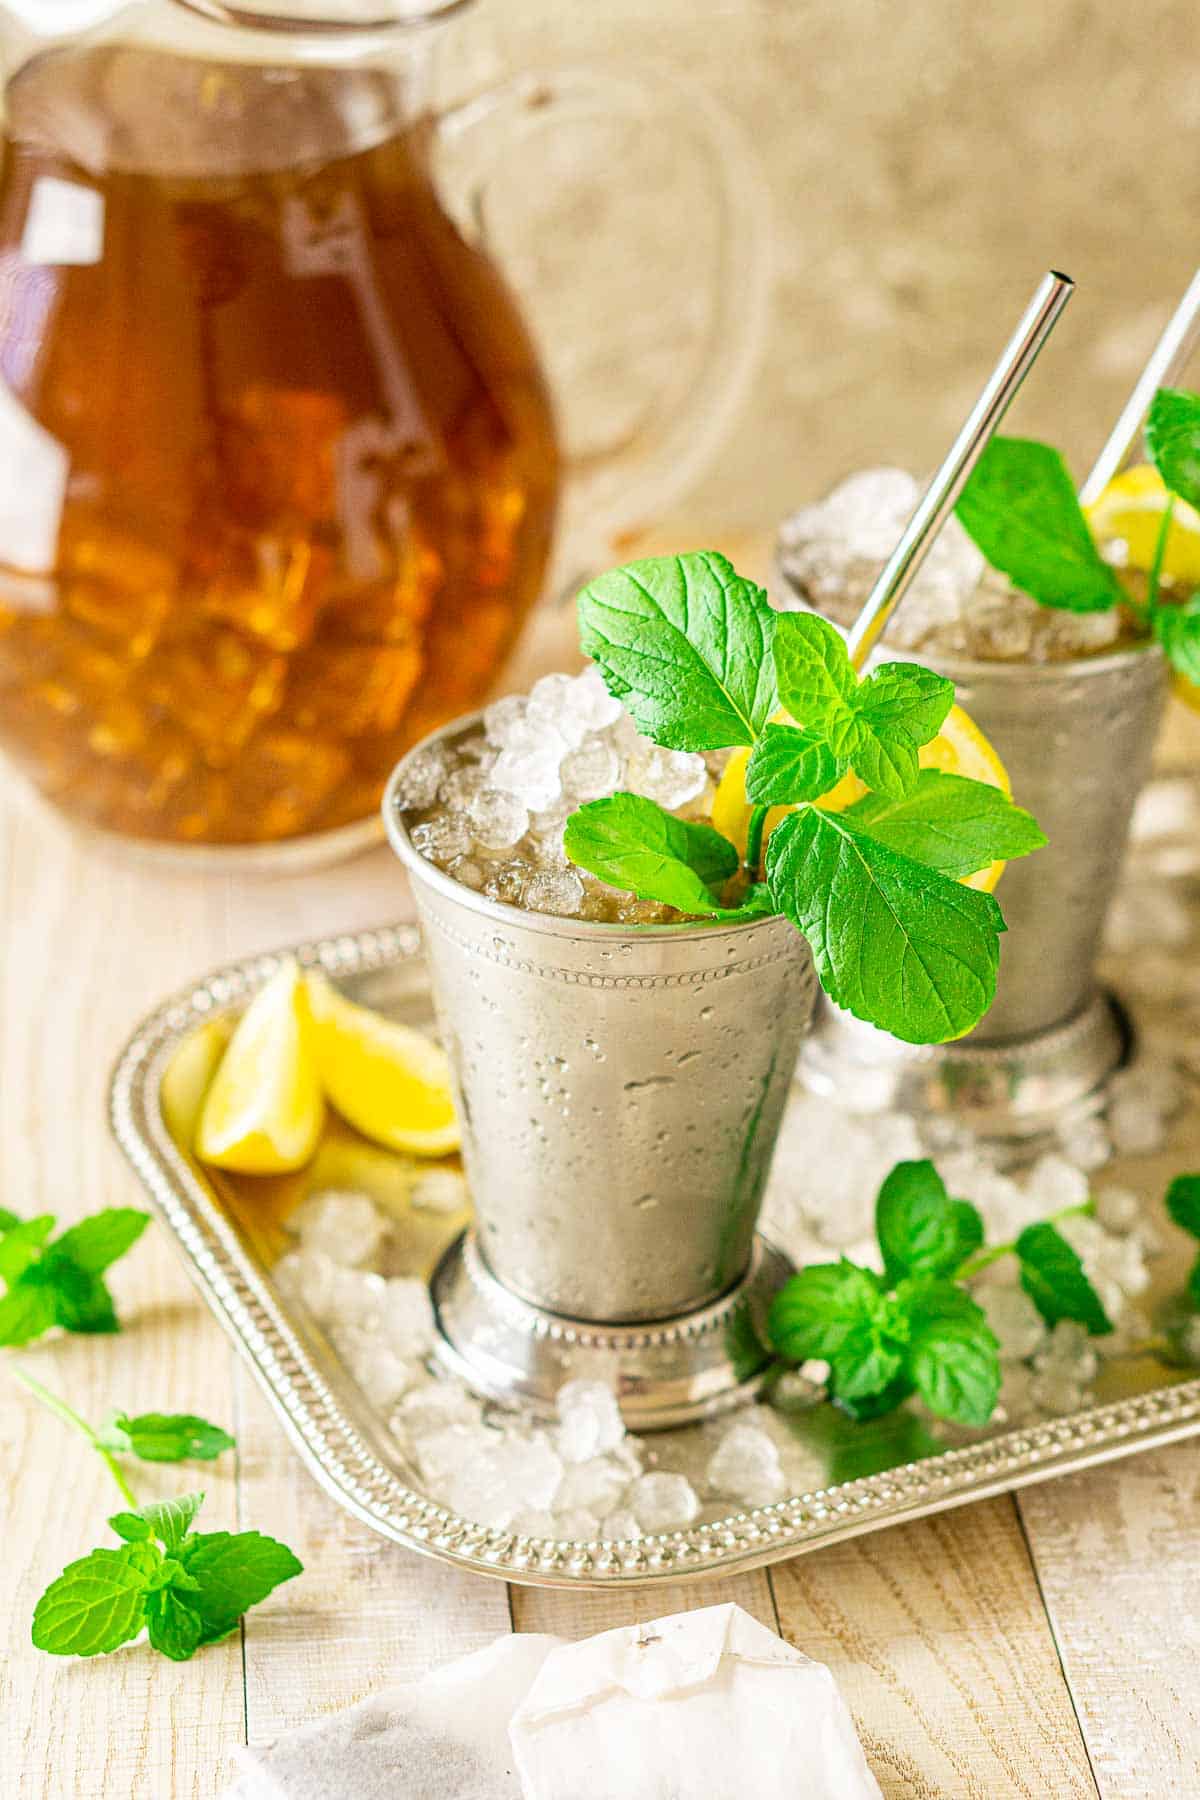 Looking down on two sweet tea mint juleps with crushed ice around them on a silver platter.